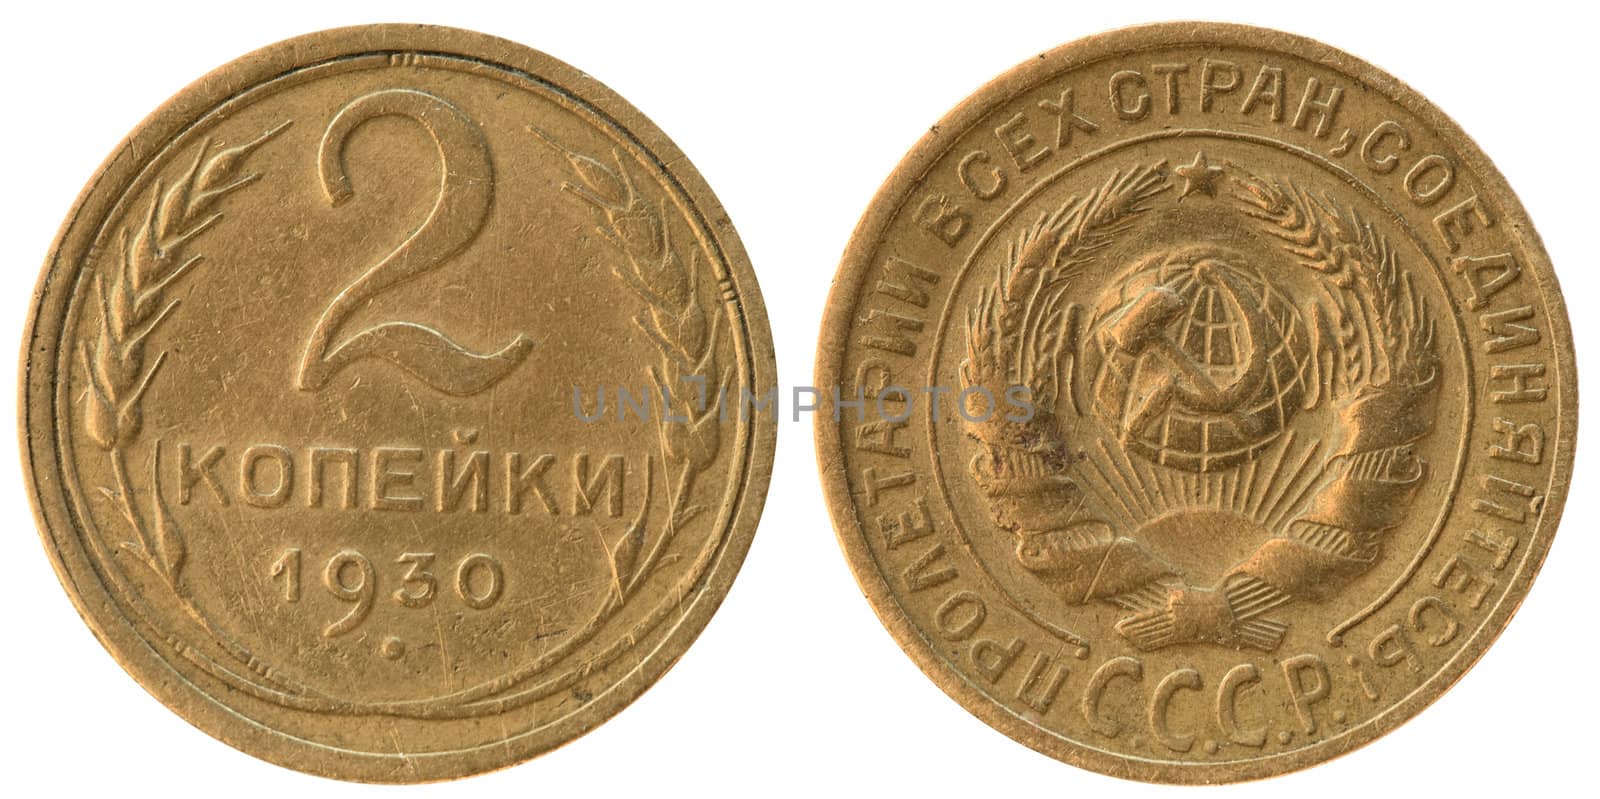 The Soviet Union coin two copecks by pzaxe